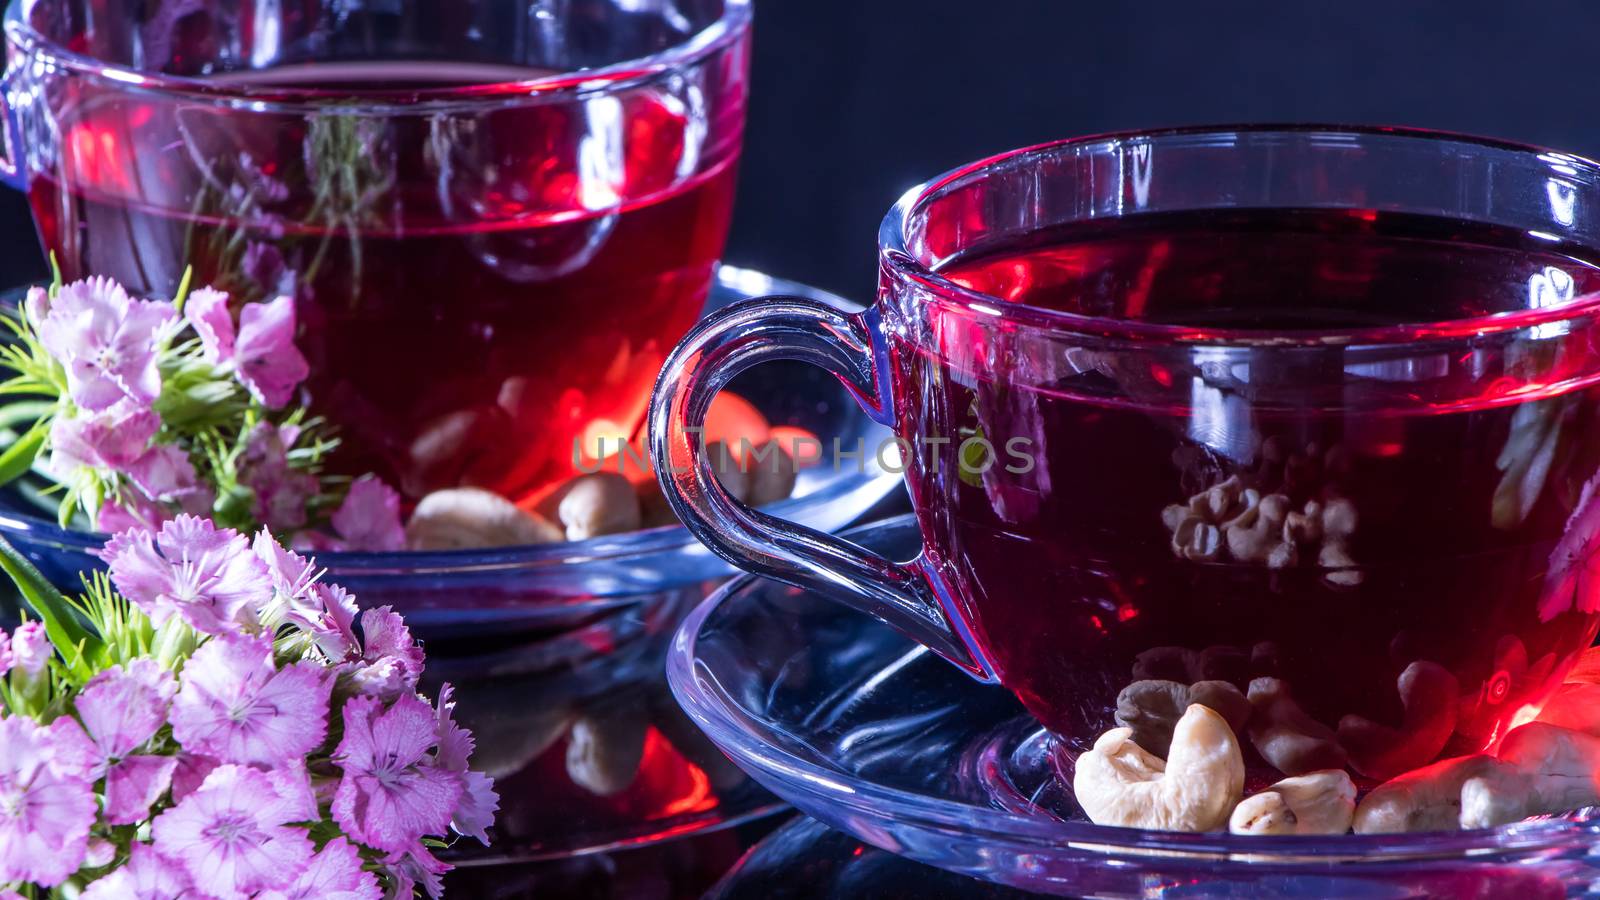 Hibiscus Red tea mug with carnation flowers close-up horizontal photo.English tea tradition.Medicinal therapy based on medicinal herbs and decoctions.Spicy herbs and medicinal broths.A relaxing drink